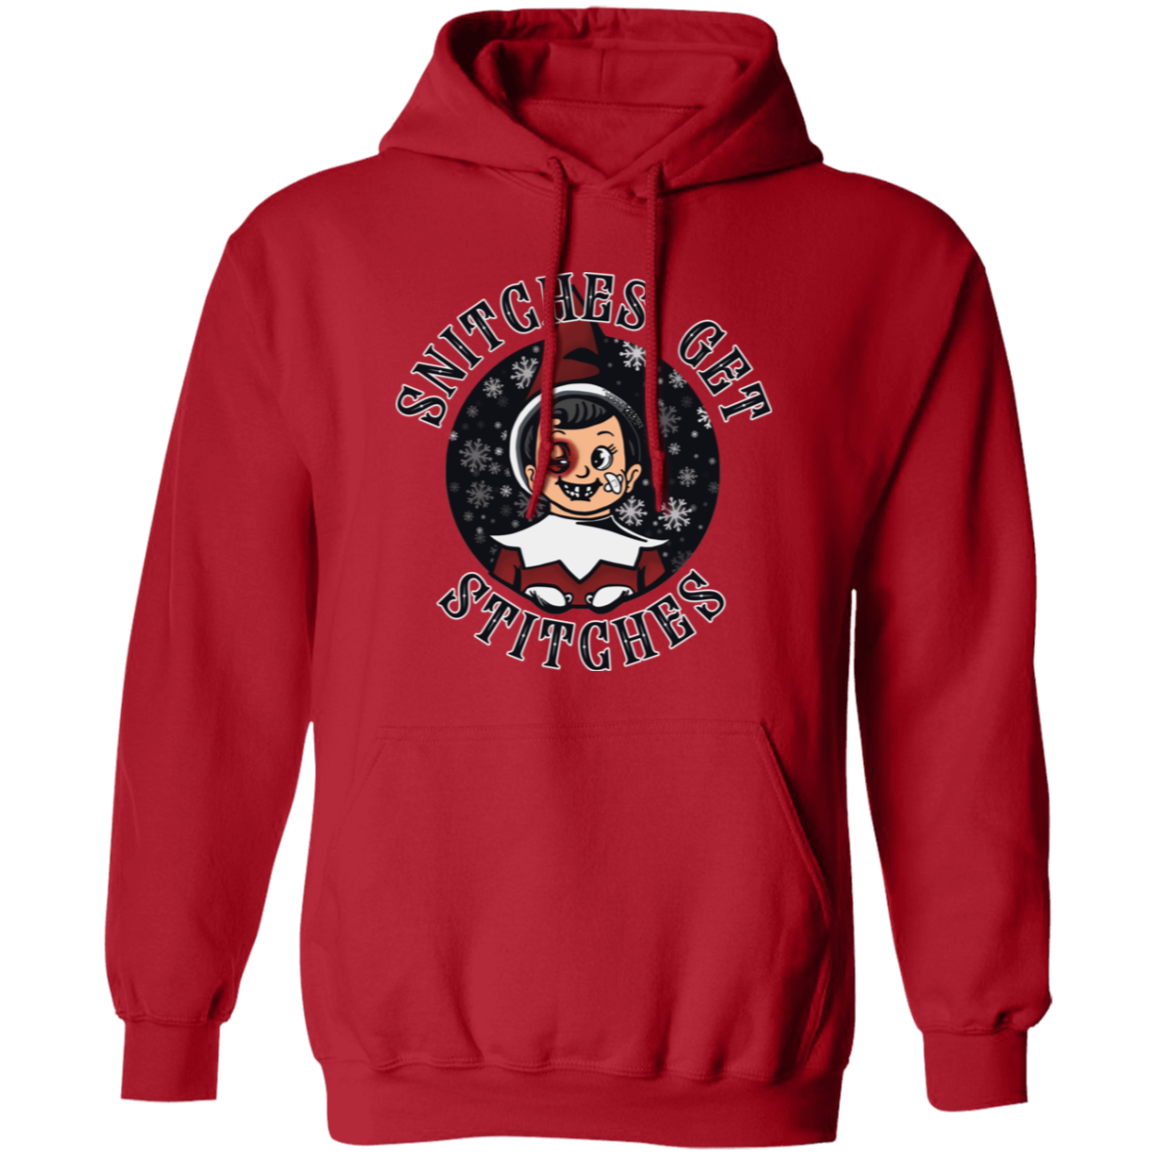 Snitches Get Stitches G185 Pullover Hoodie